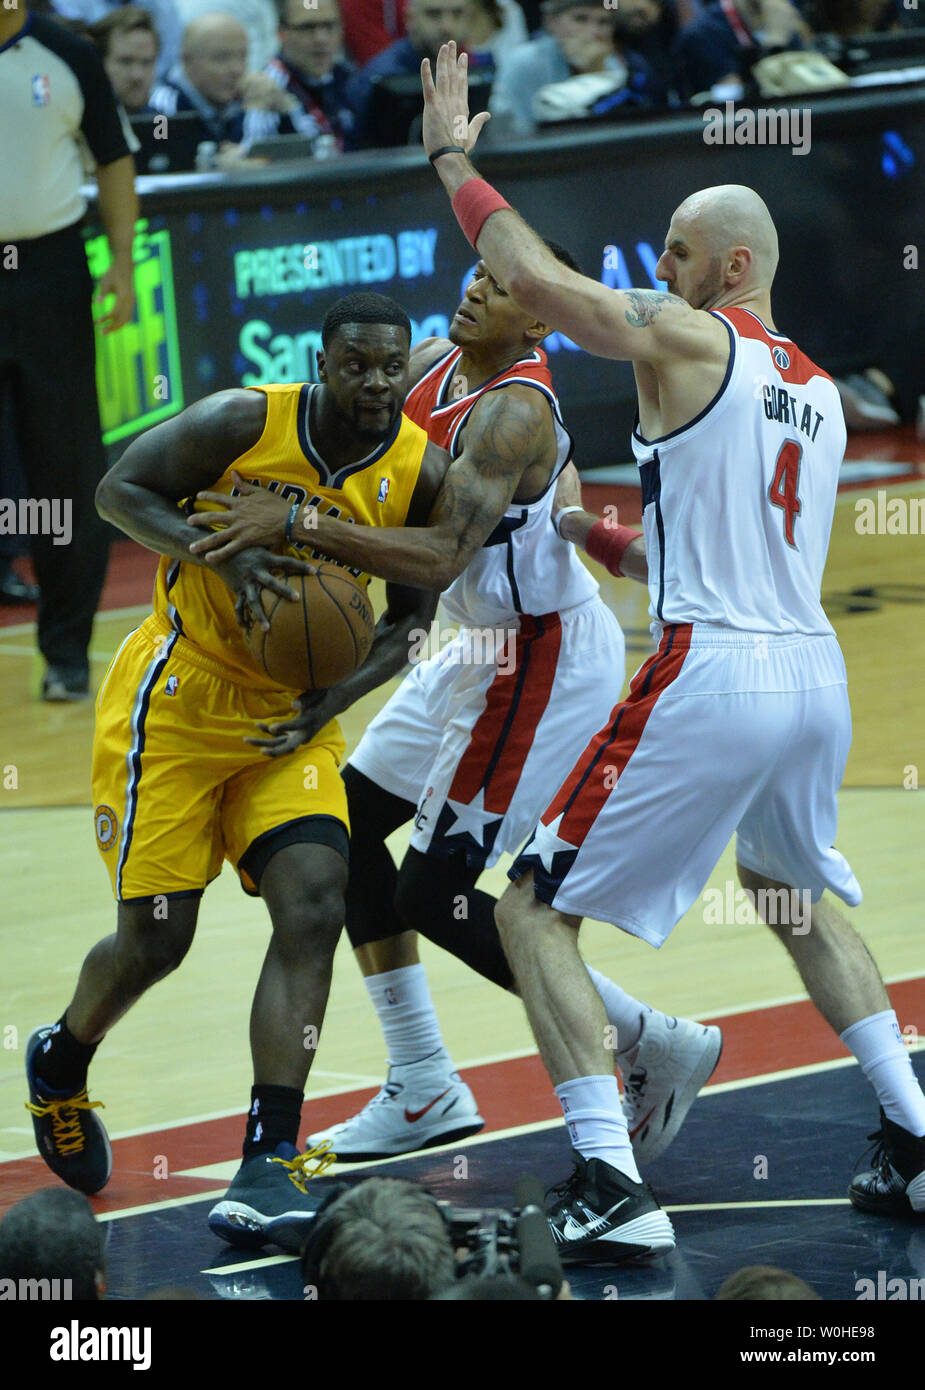 Indiana Pacers guard Lance Stephenson (1) drives to the basket against Washington Wizards guard Bradley Beal (3) and Marcin Gortat during the 1st half of game six of the Eastern Conference Semifinals at the Verizon Center in Washington, D.C. on May 15, 2014. UPI/Kevin Dietsch Stock Photo